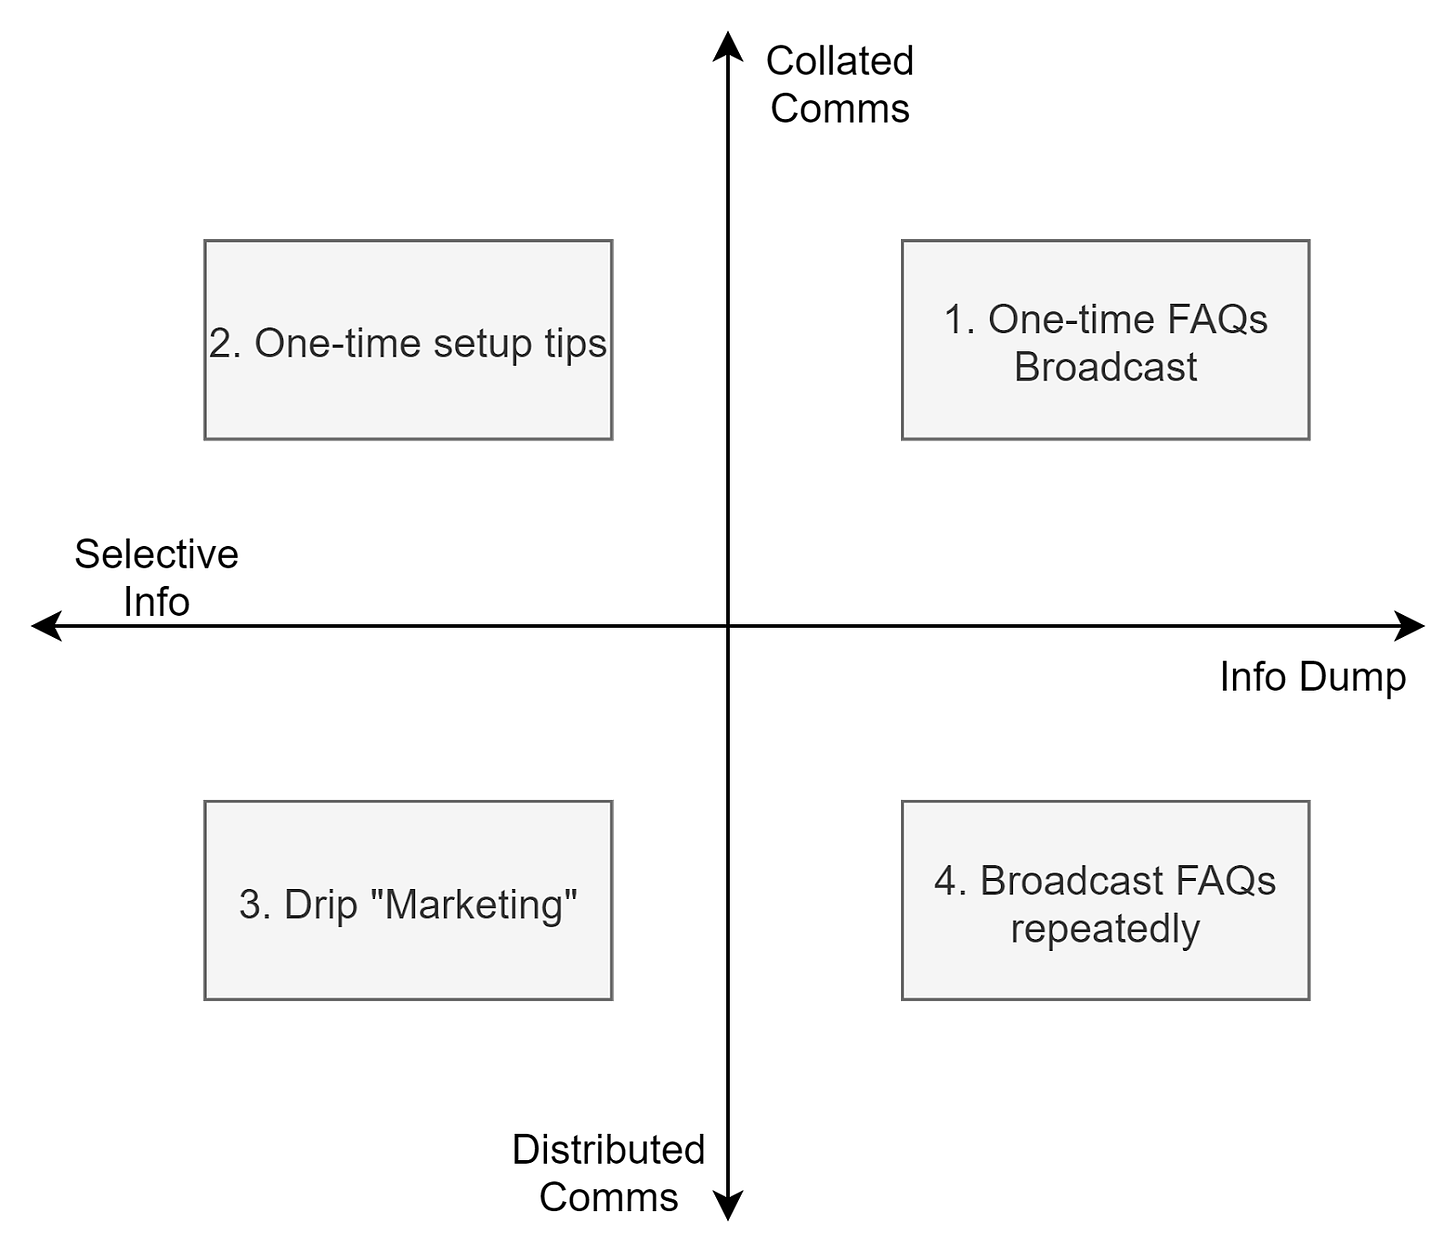 A 2x2 graph showing one-time FAQs broadcast, setup tips, drip marketing, and Repeatedly FAQs broadcast